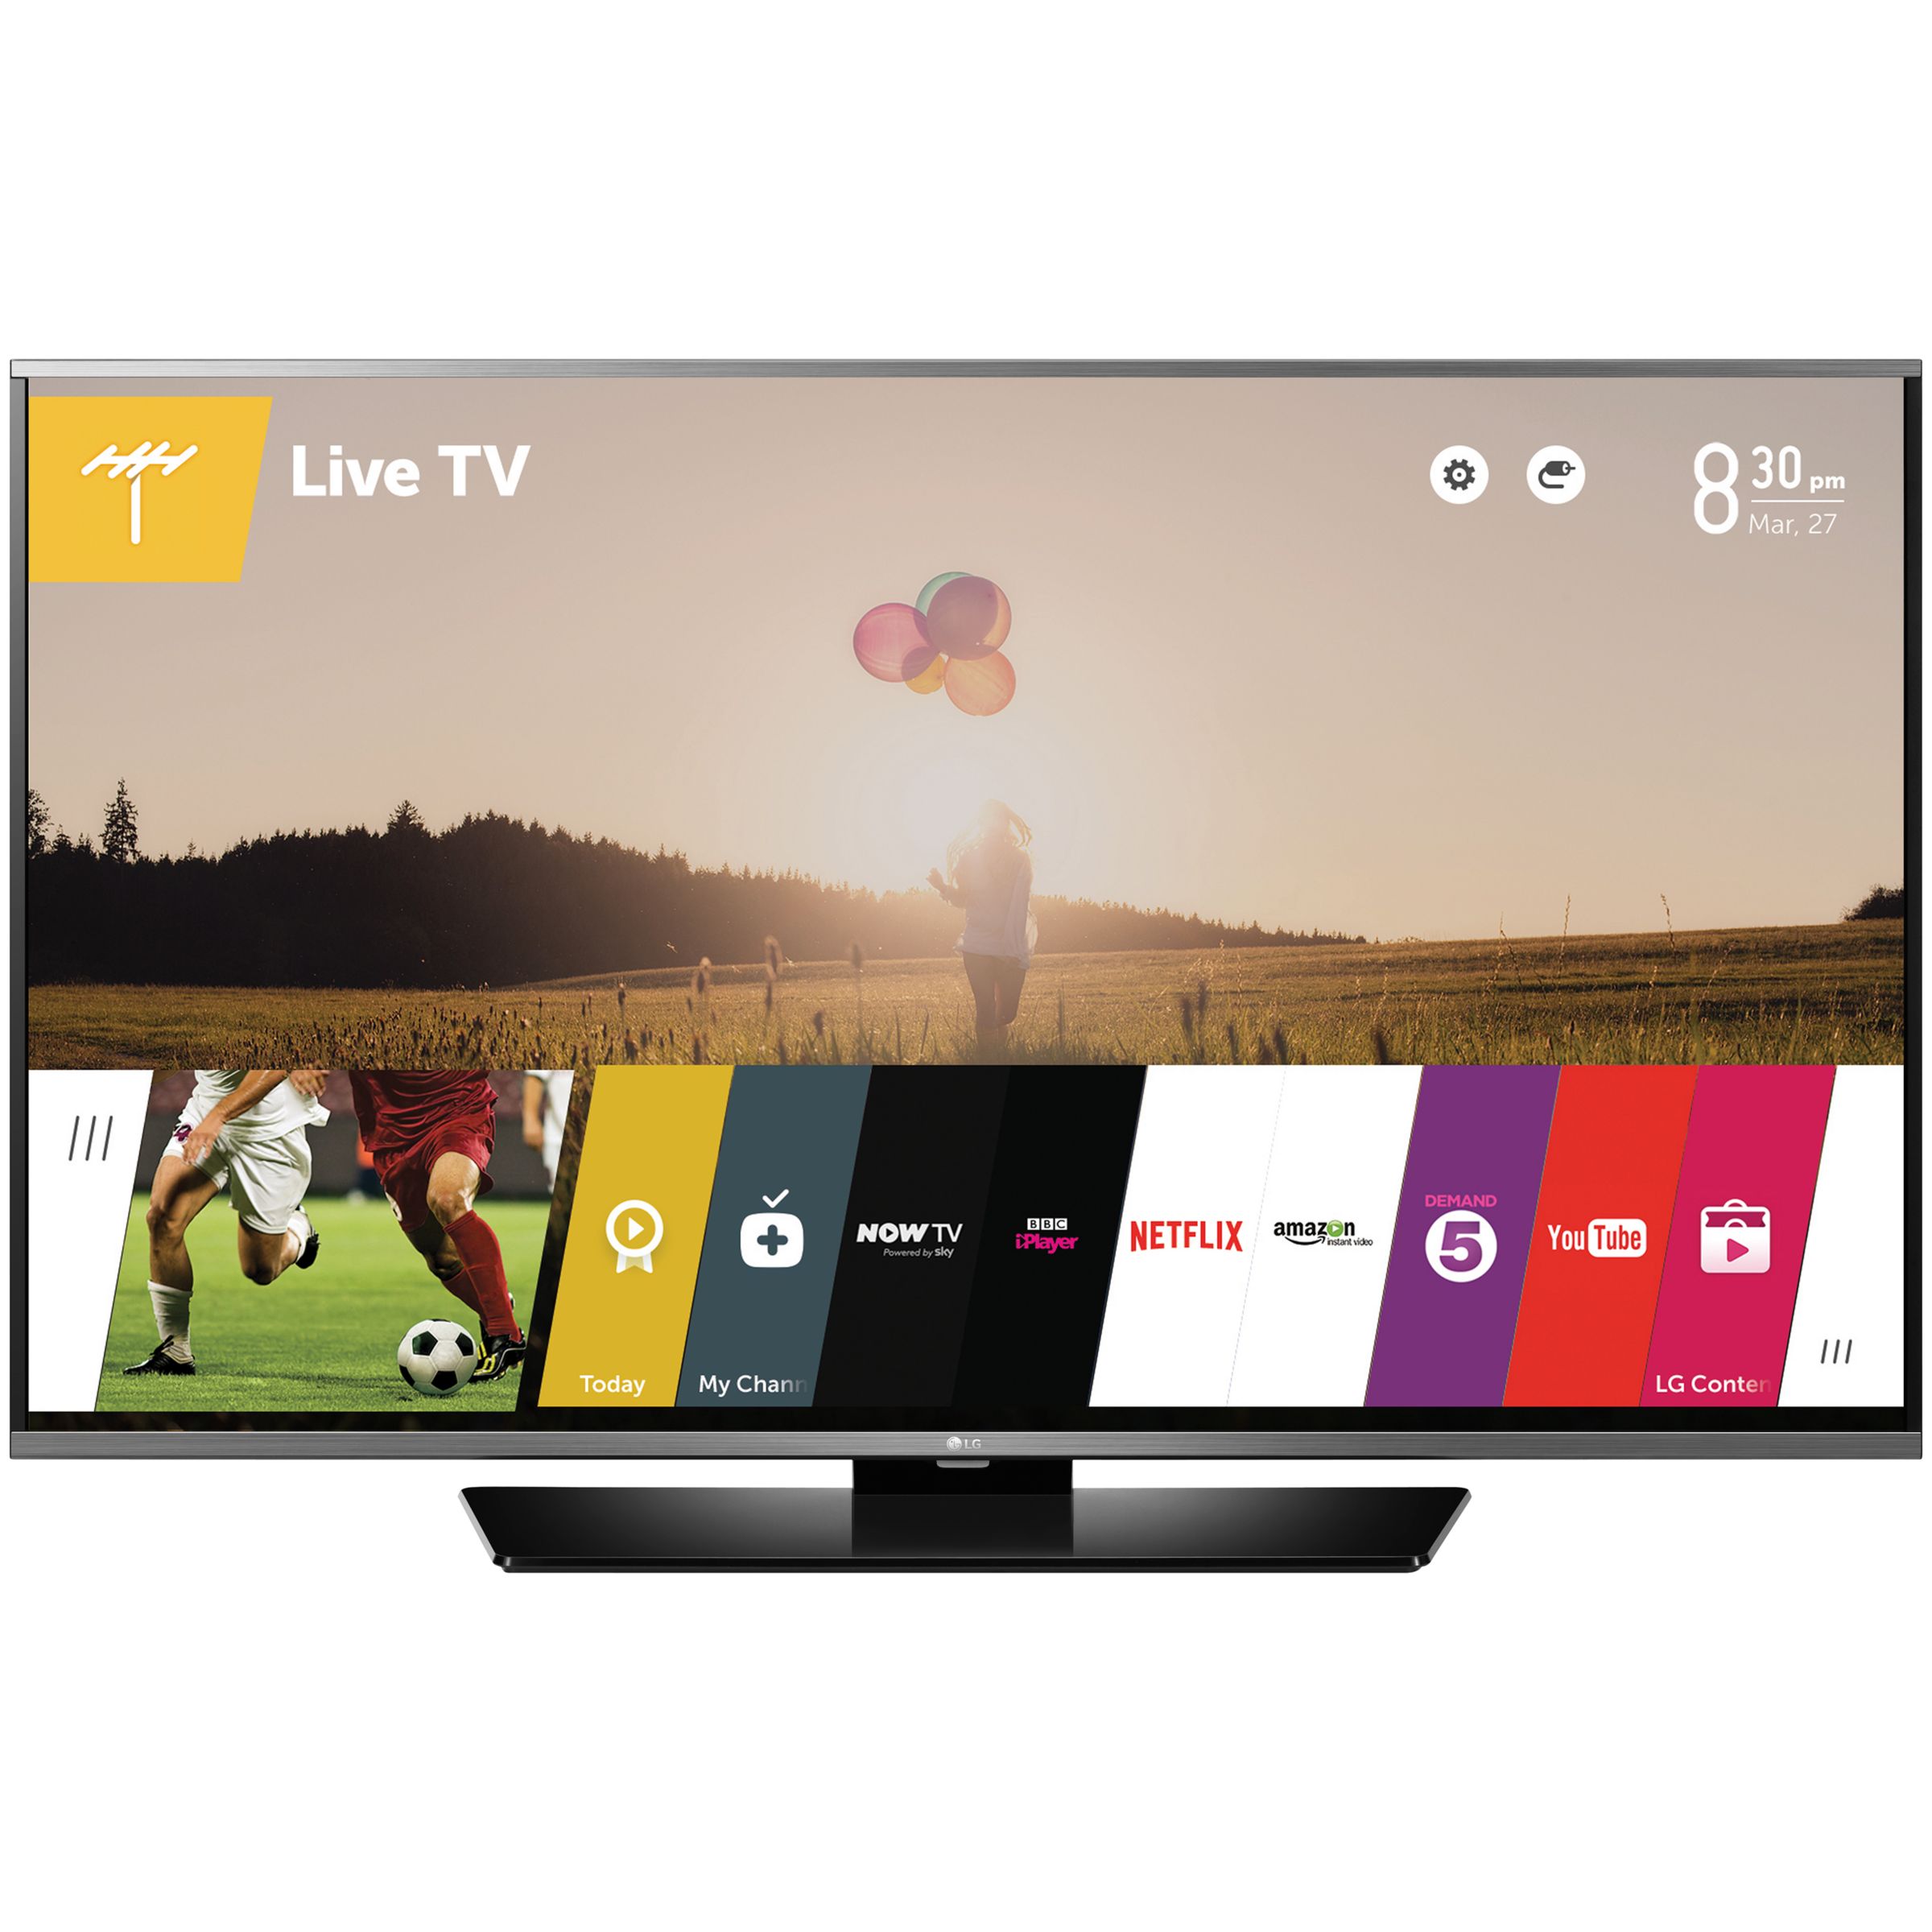 LG 49LF630V LED HD 1080p Smart TV, 49" with Freeview HD and Built-In Wi-Fi